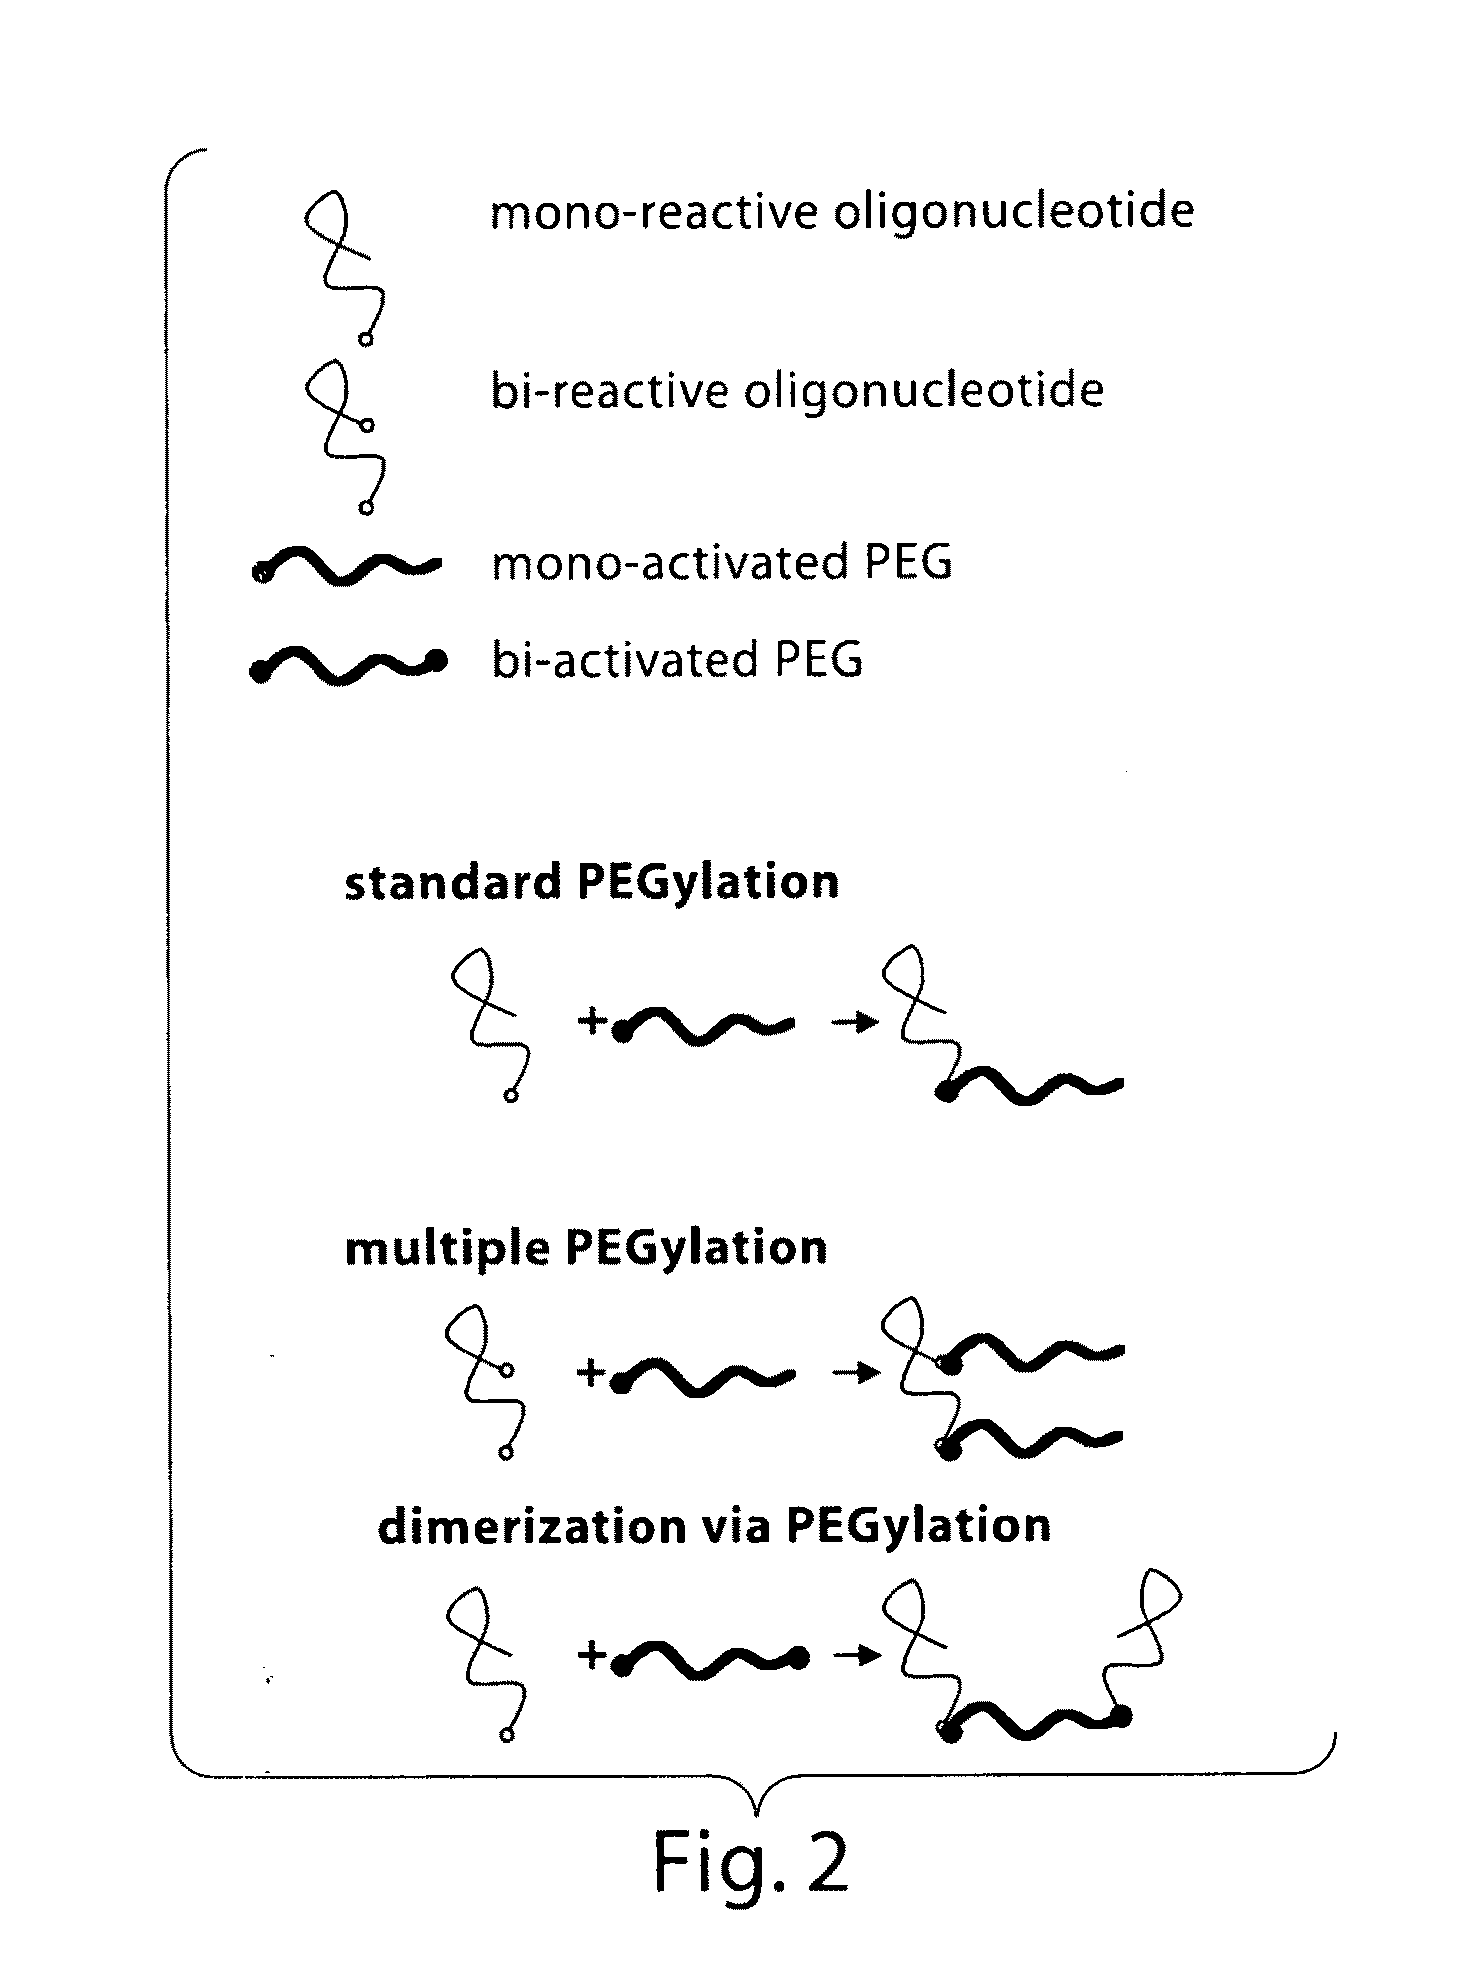 Materials and methods for the generation of transcripts comprising modified nucleotides